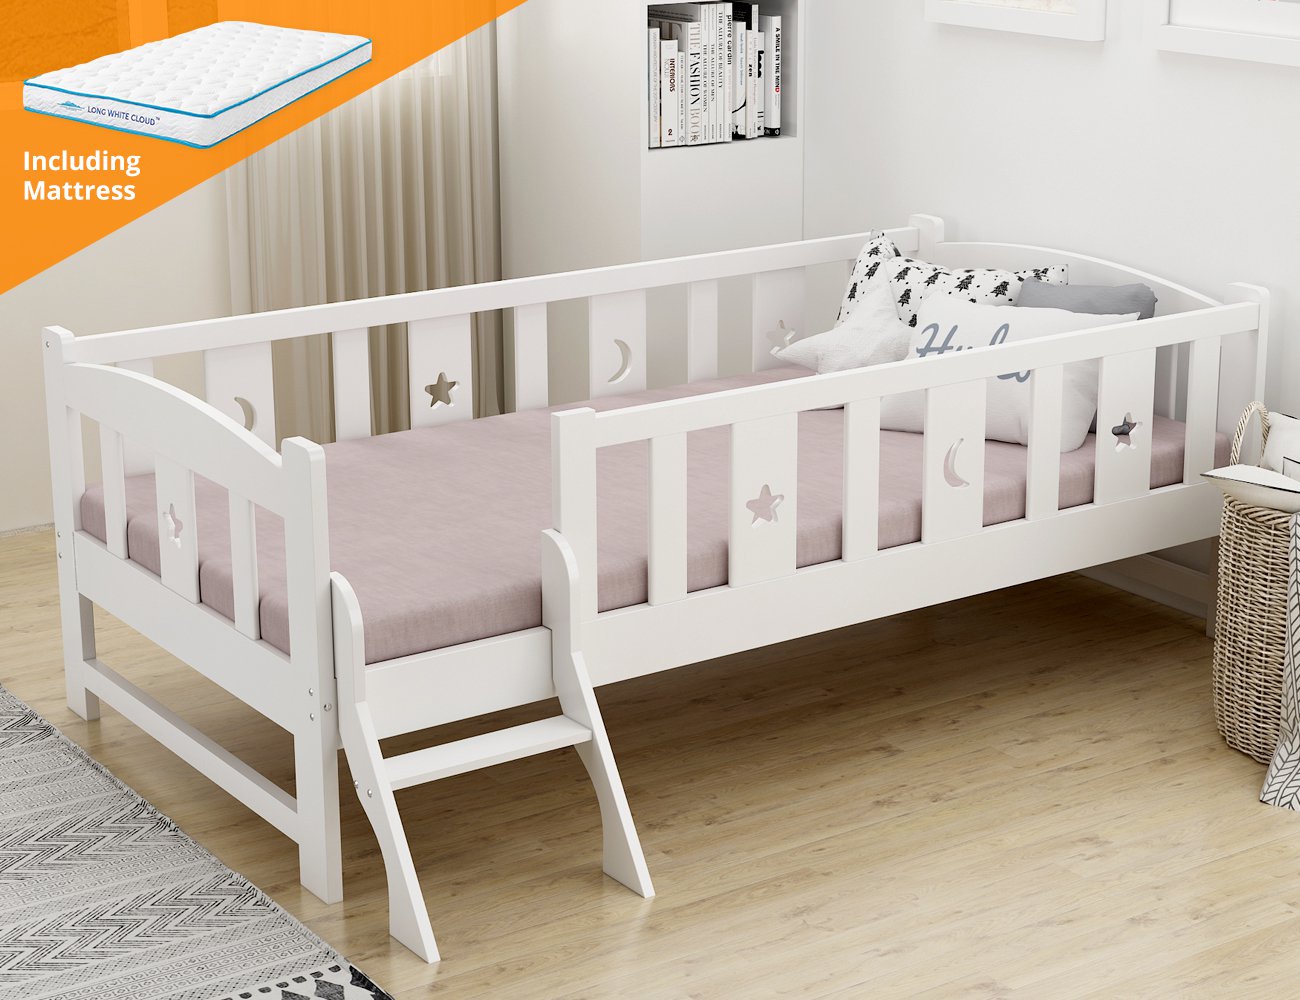 single mattress for child's bed